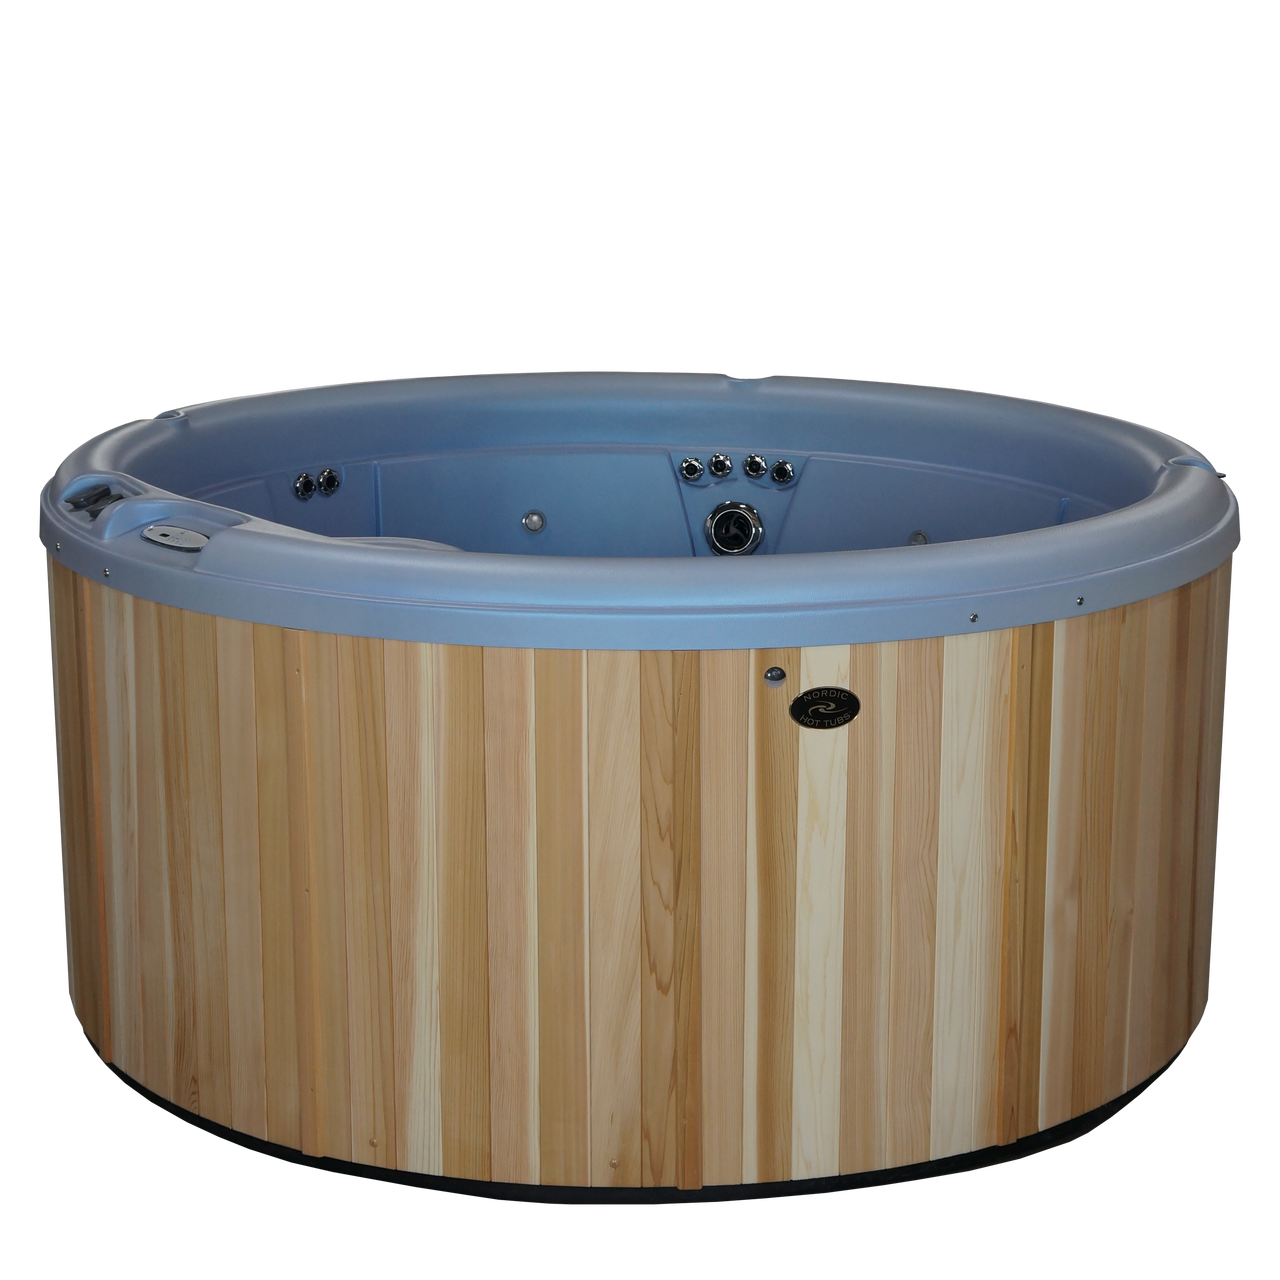 Nordic Hot Tubs Classic Series: Warrior XL by Nordic Hot Tubs at Altman's  Billiards and Barstools!